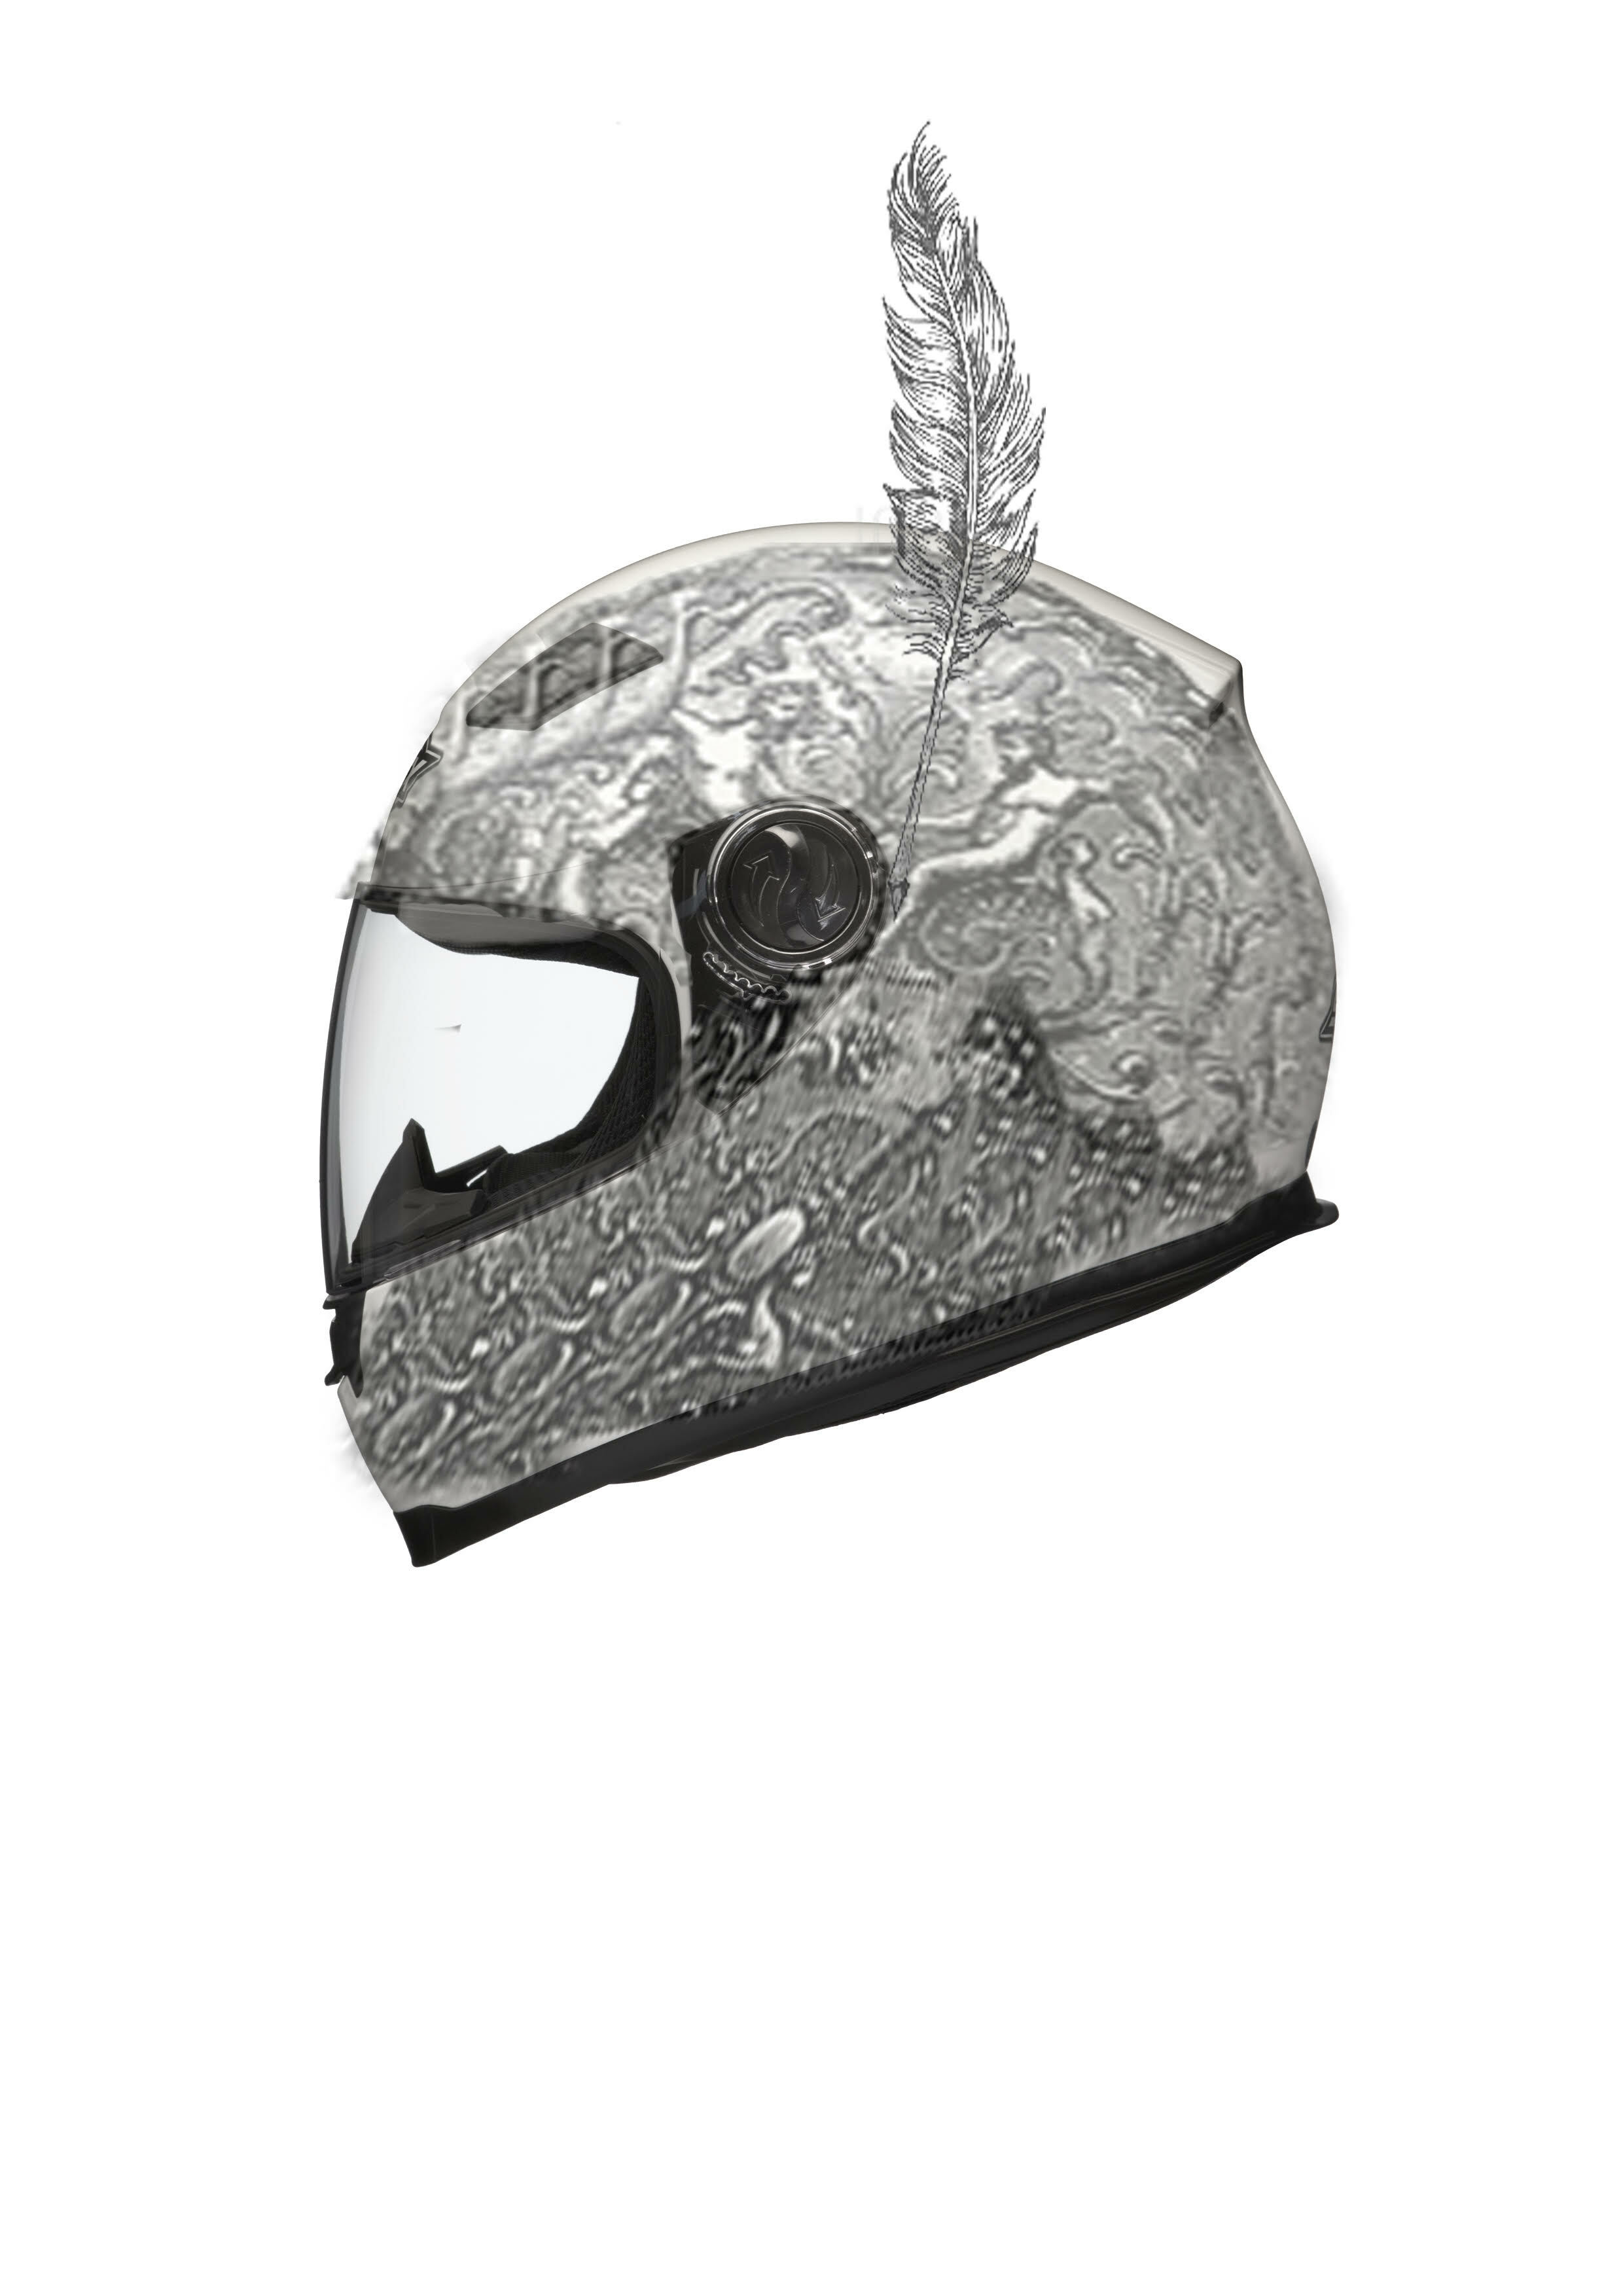 a black and white motorbike helmet seen from the side with a feather sticking to the side